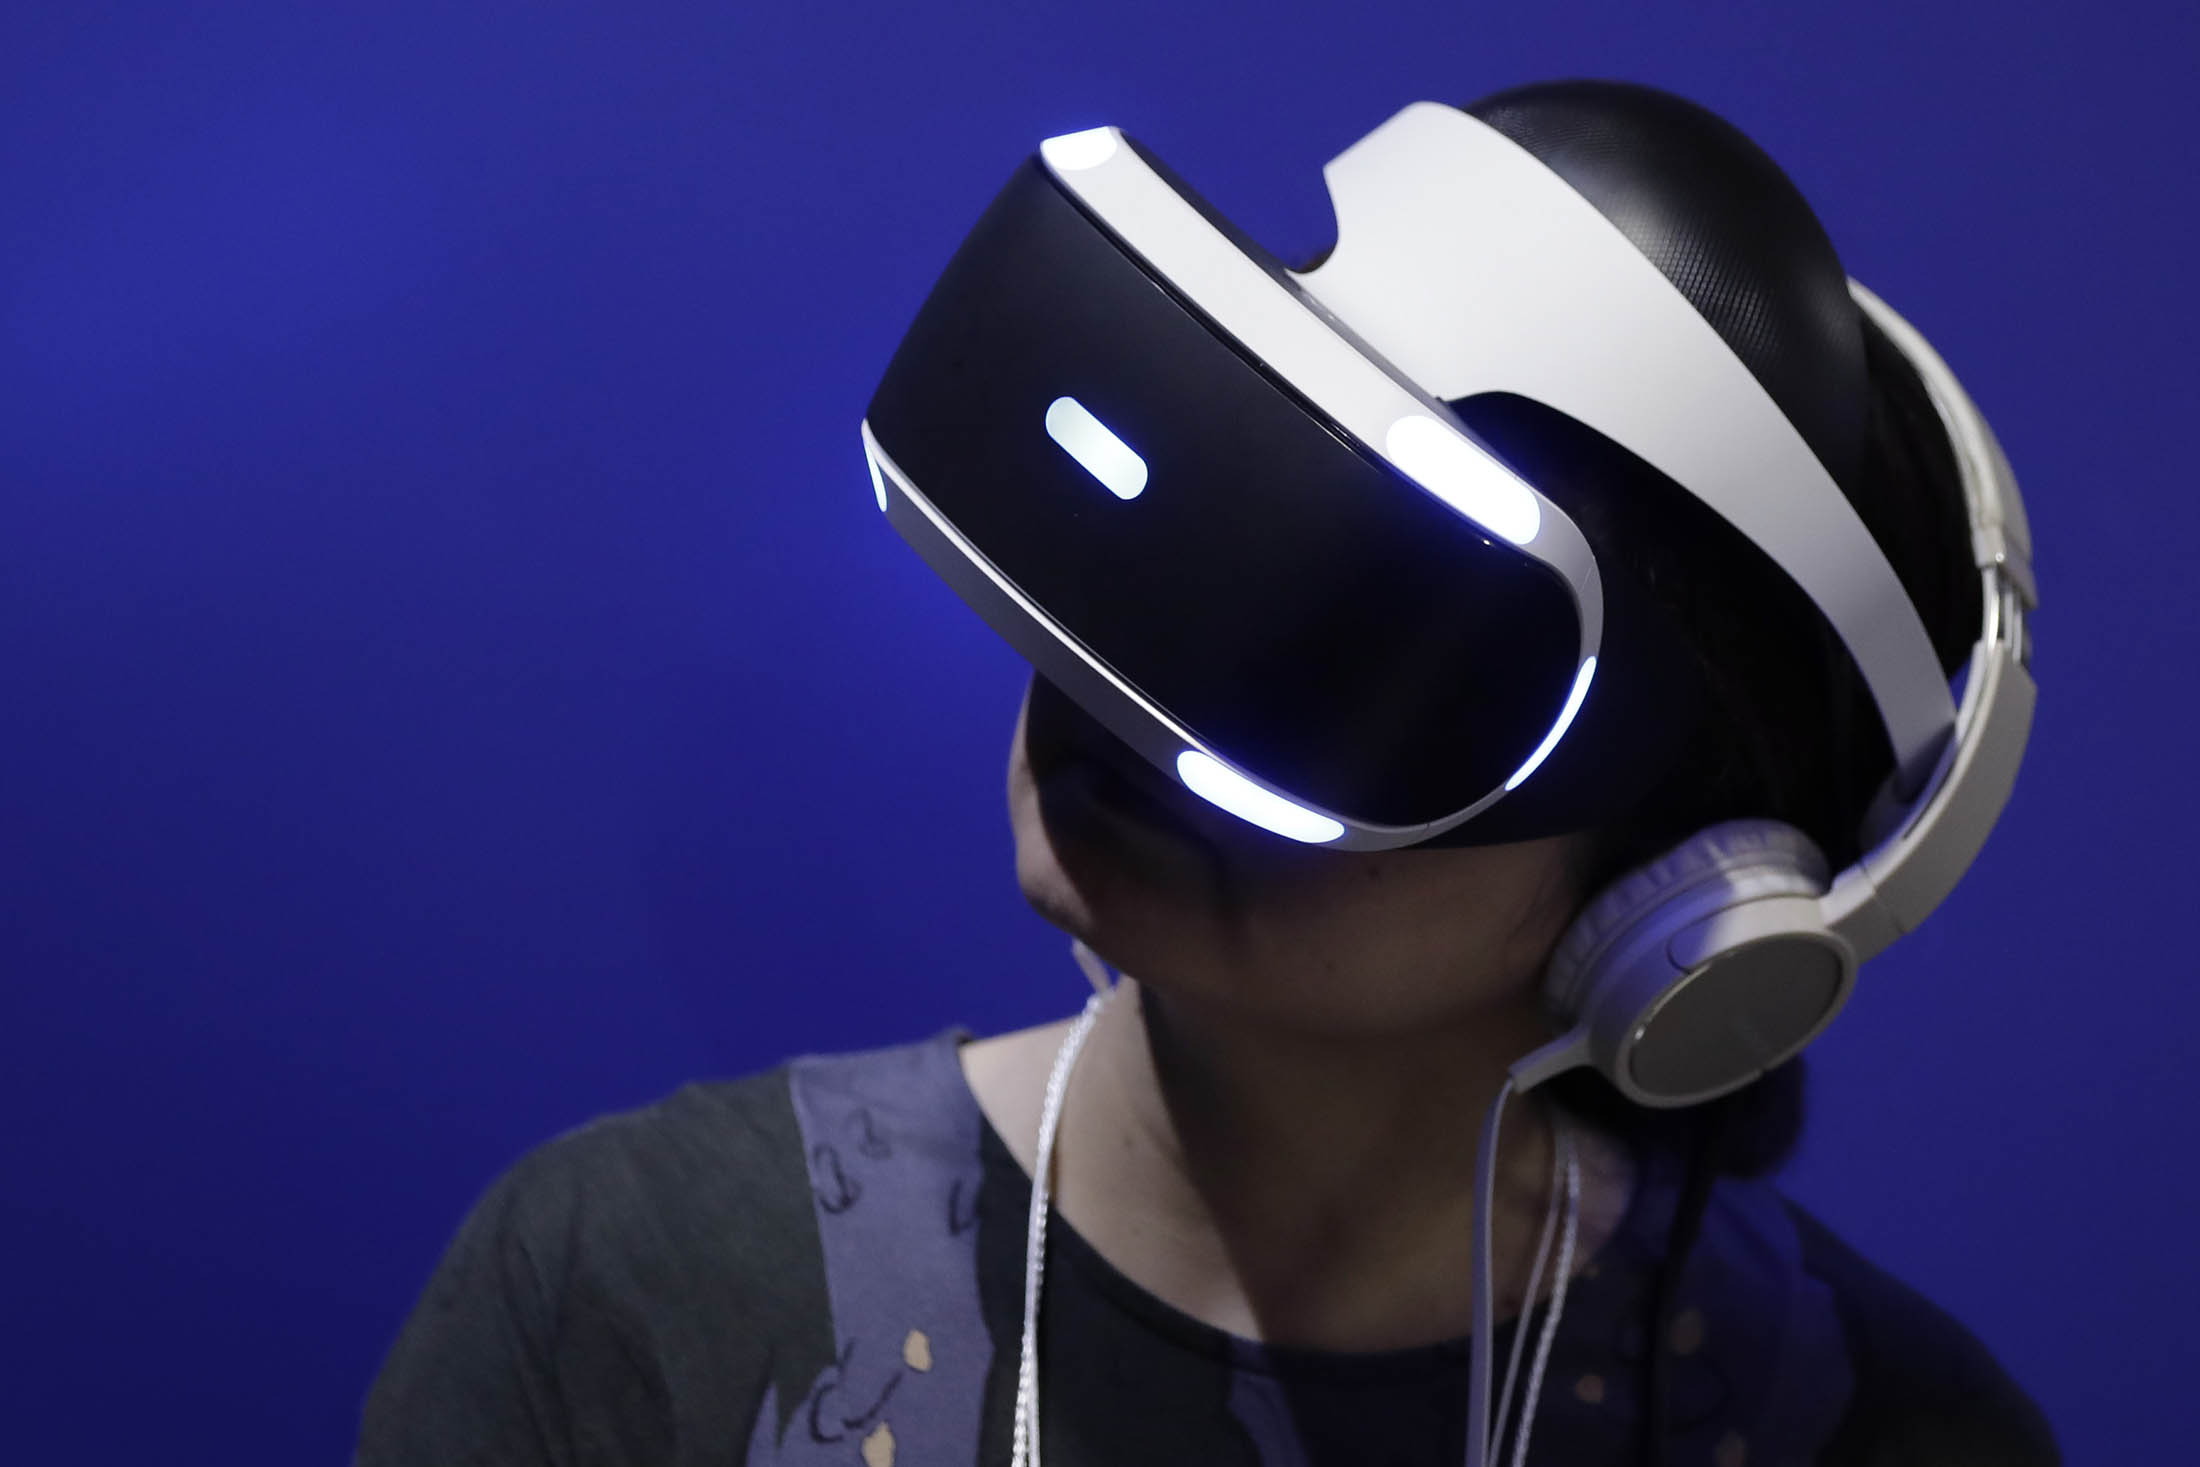 GameStop to Sell Out of PlayStation VR Goggles, COO Says - Bloomberg